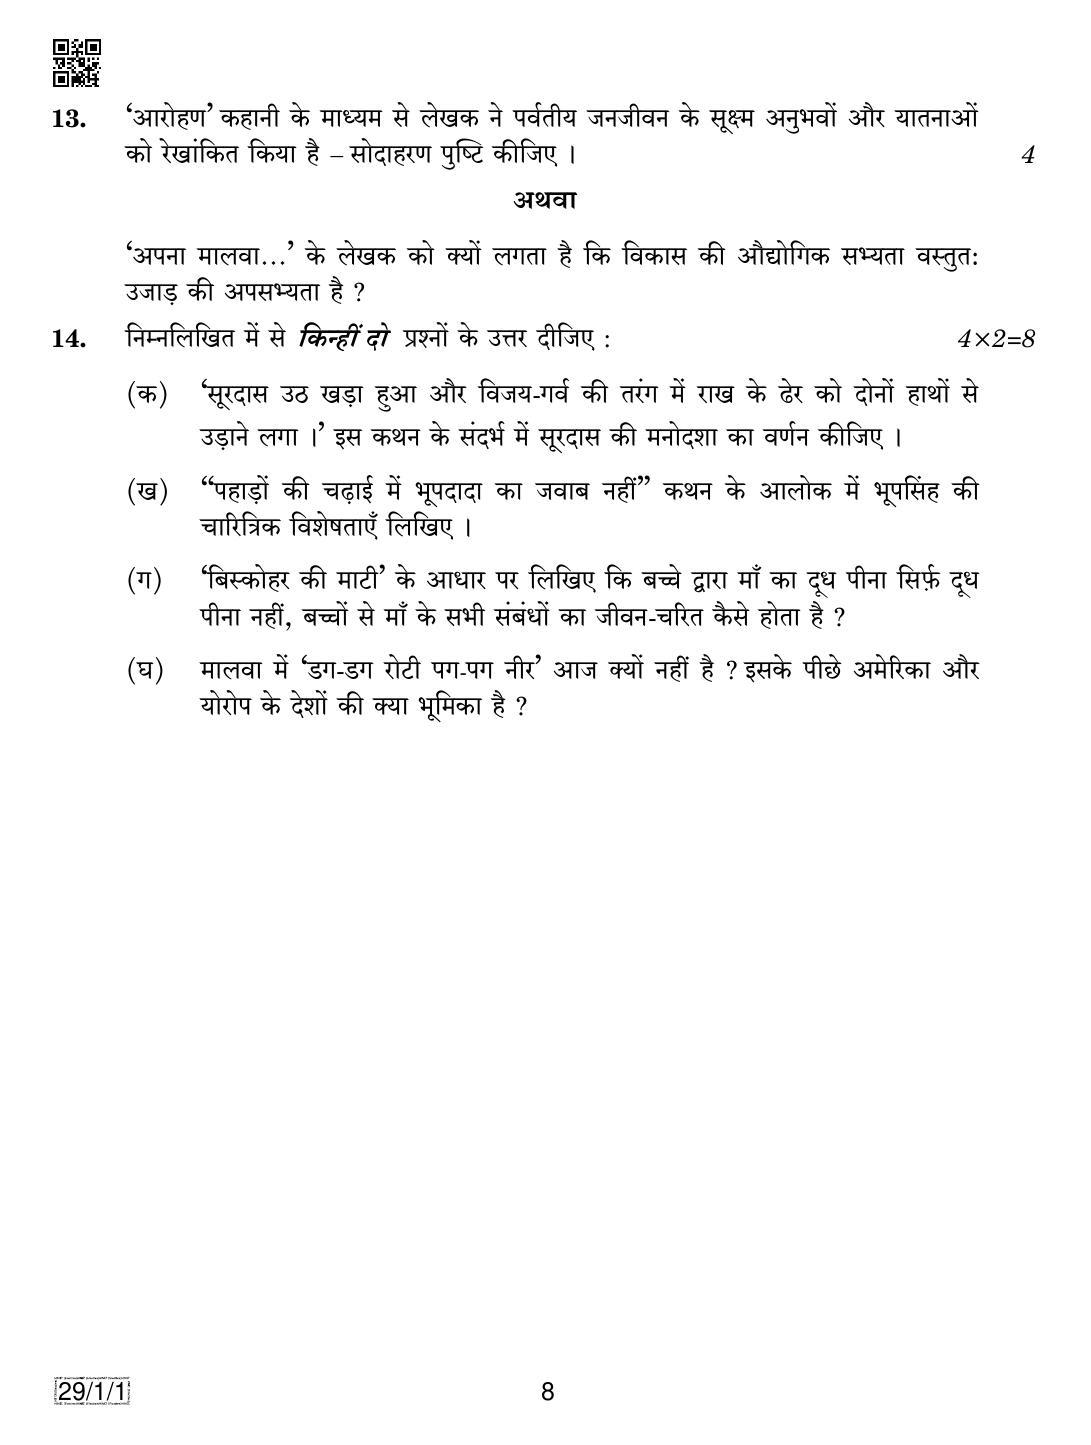 CBSE Class 12 29-1-1 HINDI ELECTIVE 2019 Compartment Question Paper - Page 8